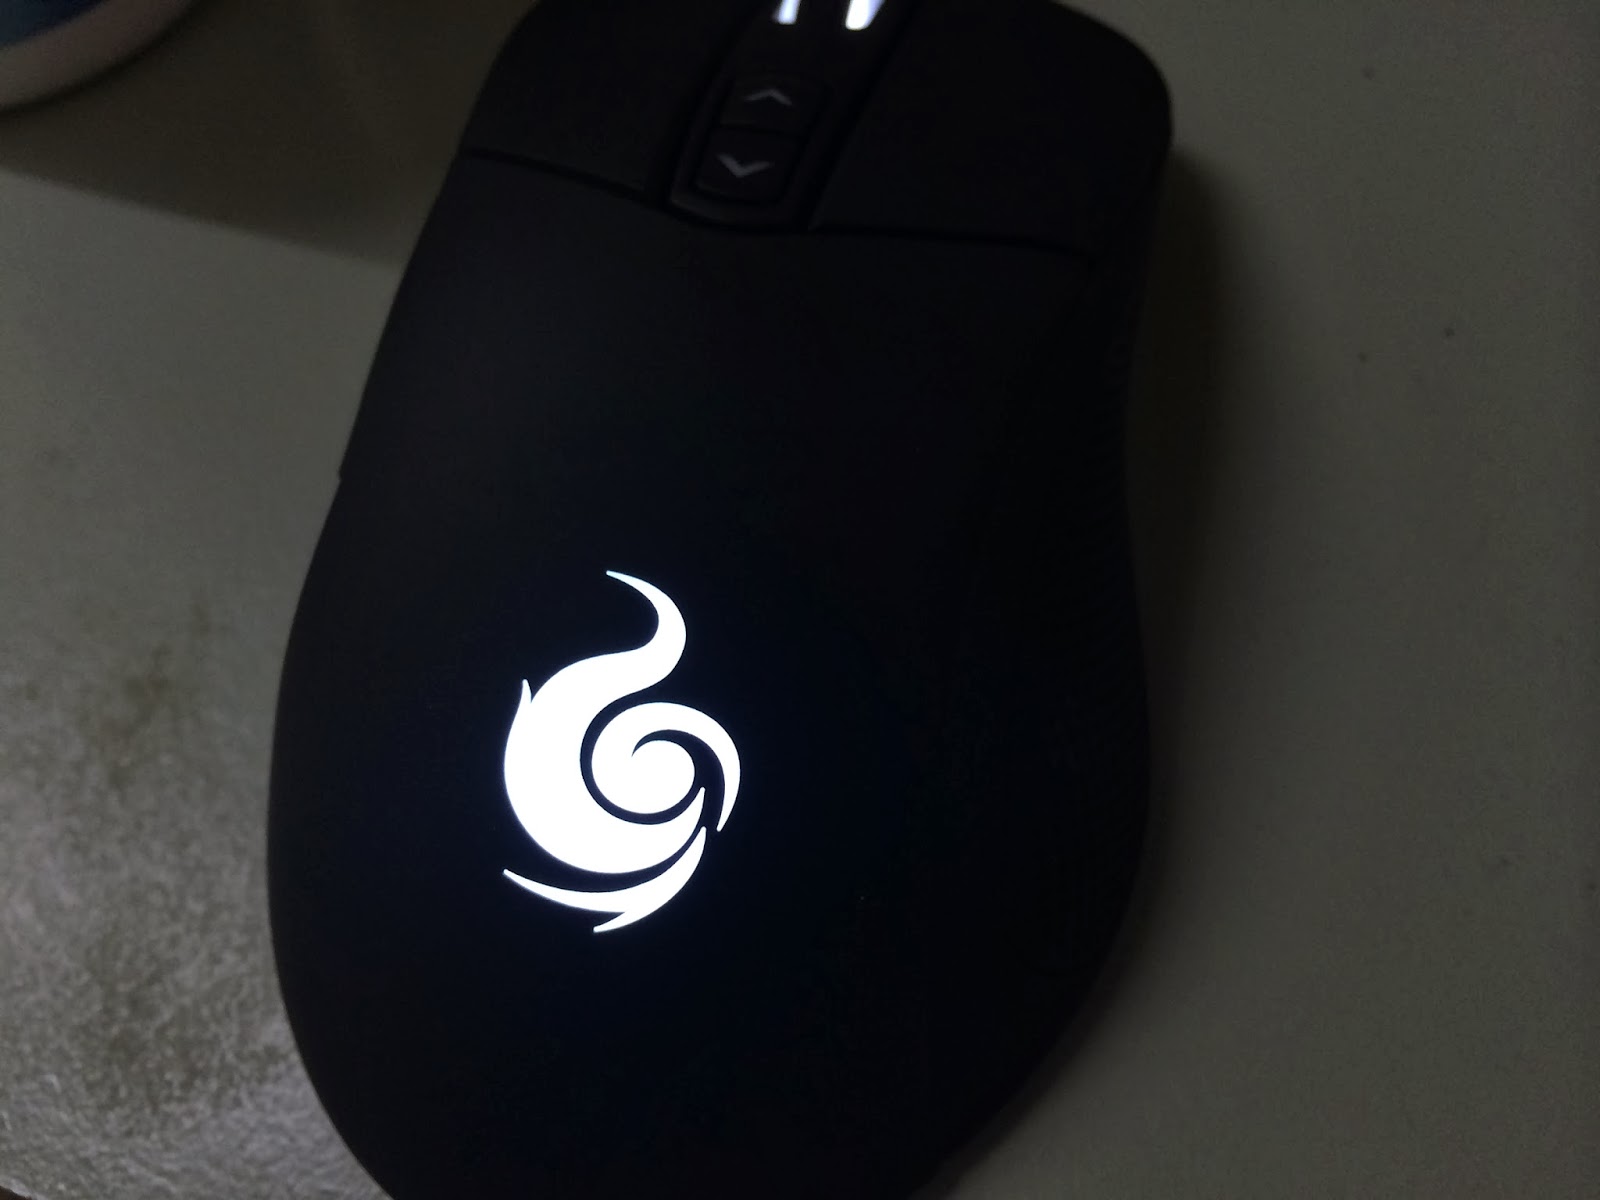 A Sneak Preview On The CM Storm Mizar Laser Gaming Mice 8